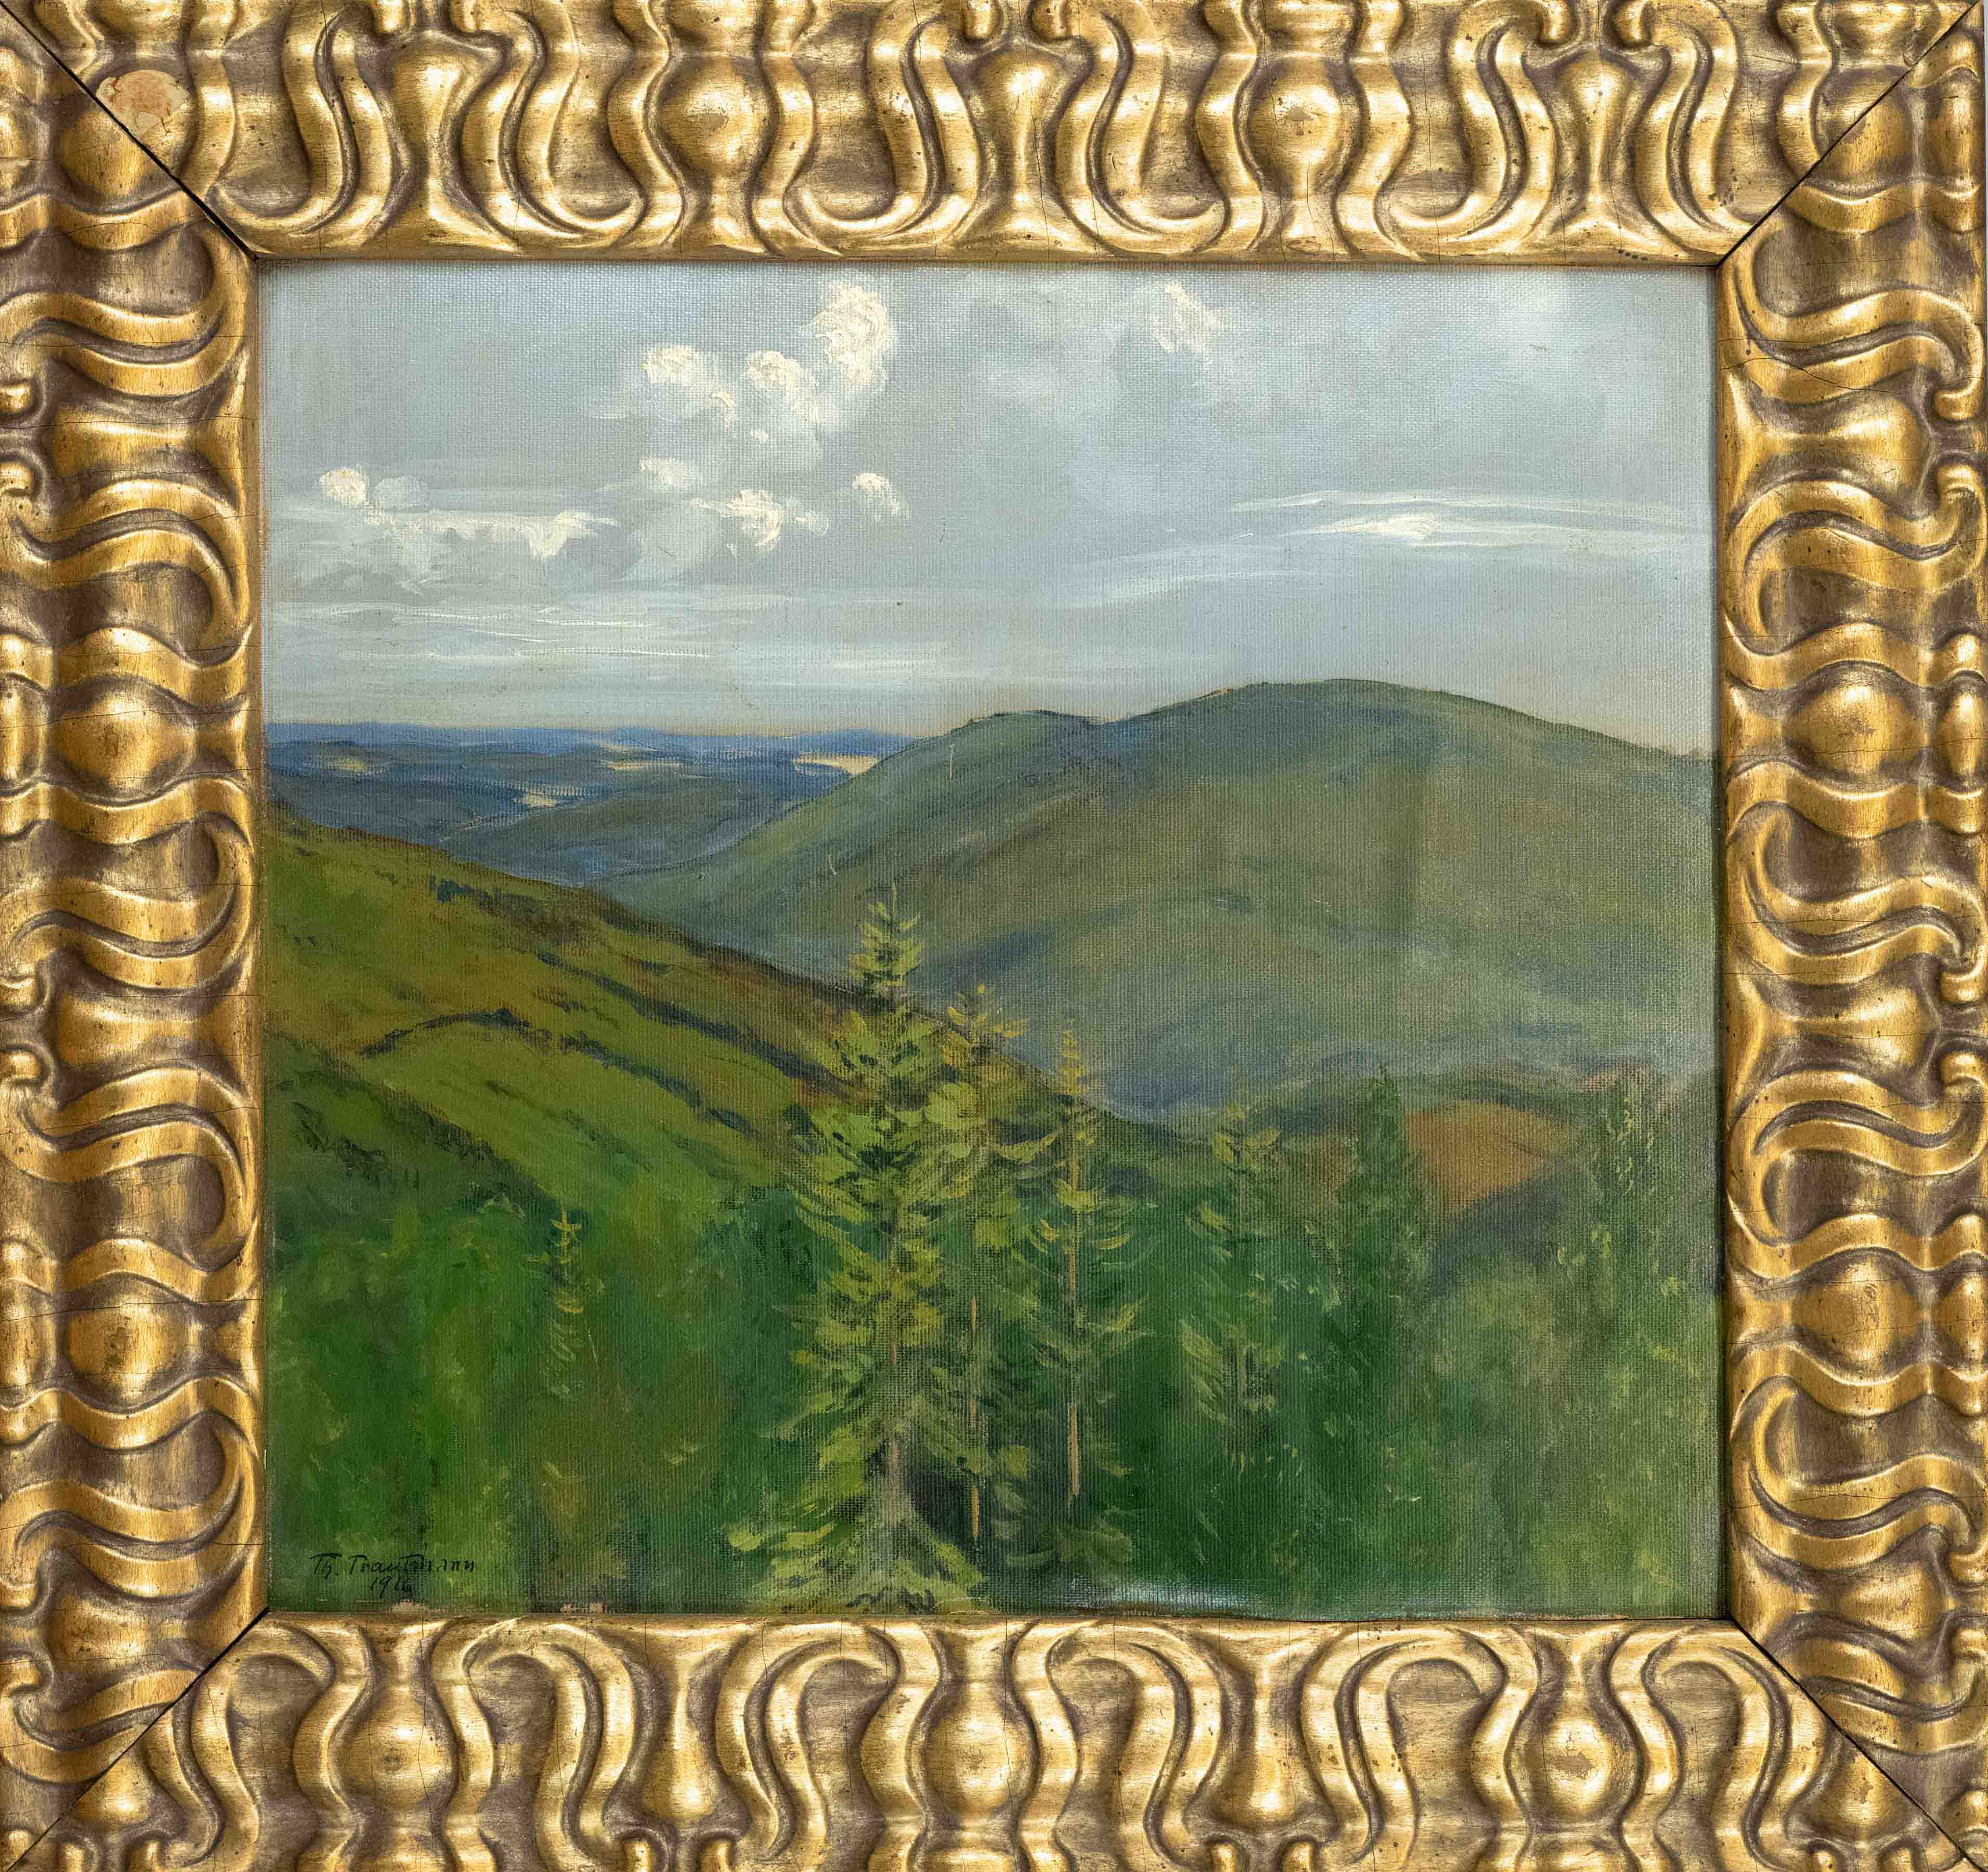 Th. Trautmann, landscape painter early 20th century, low mountain landscape, oil on canvas